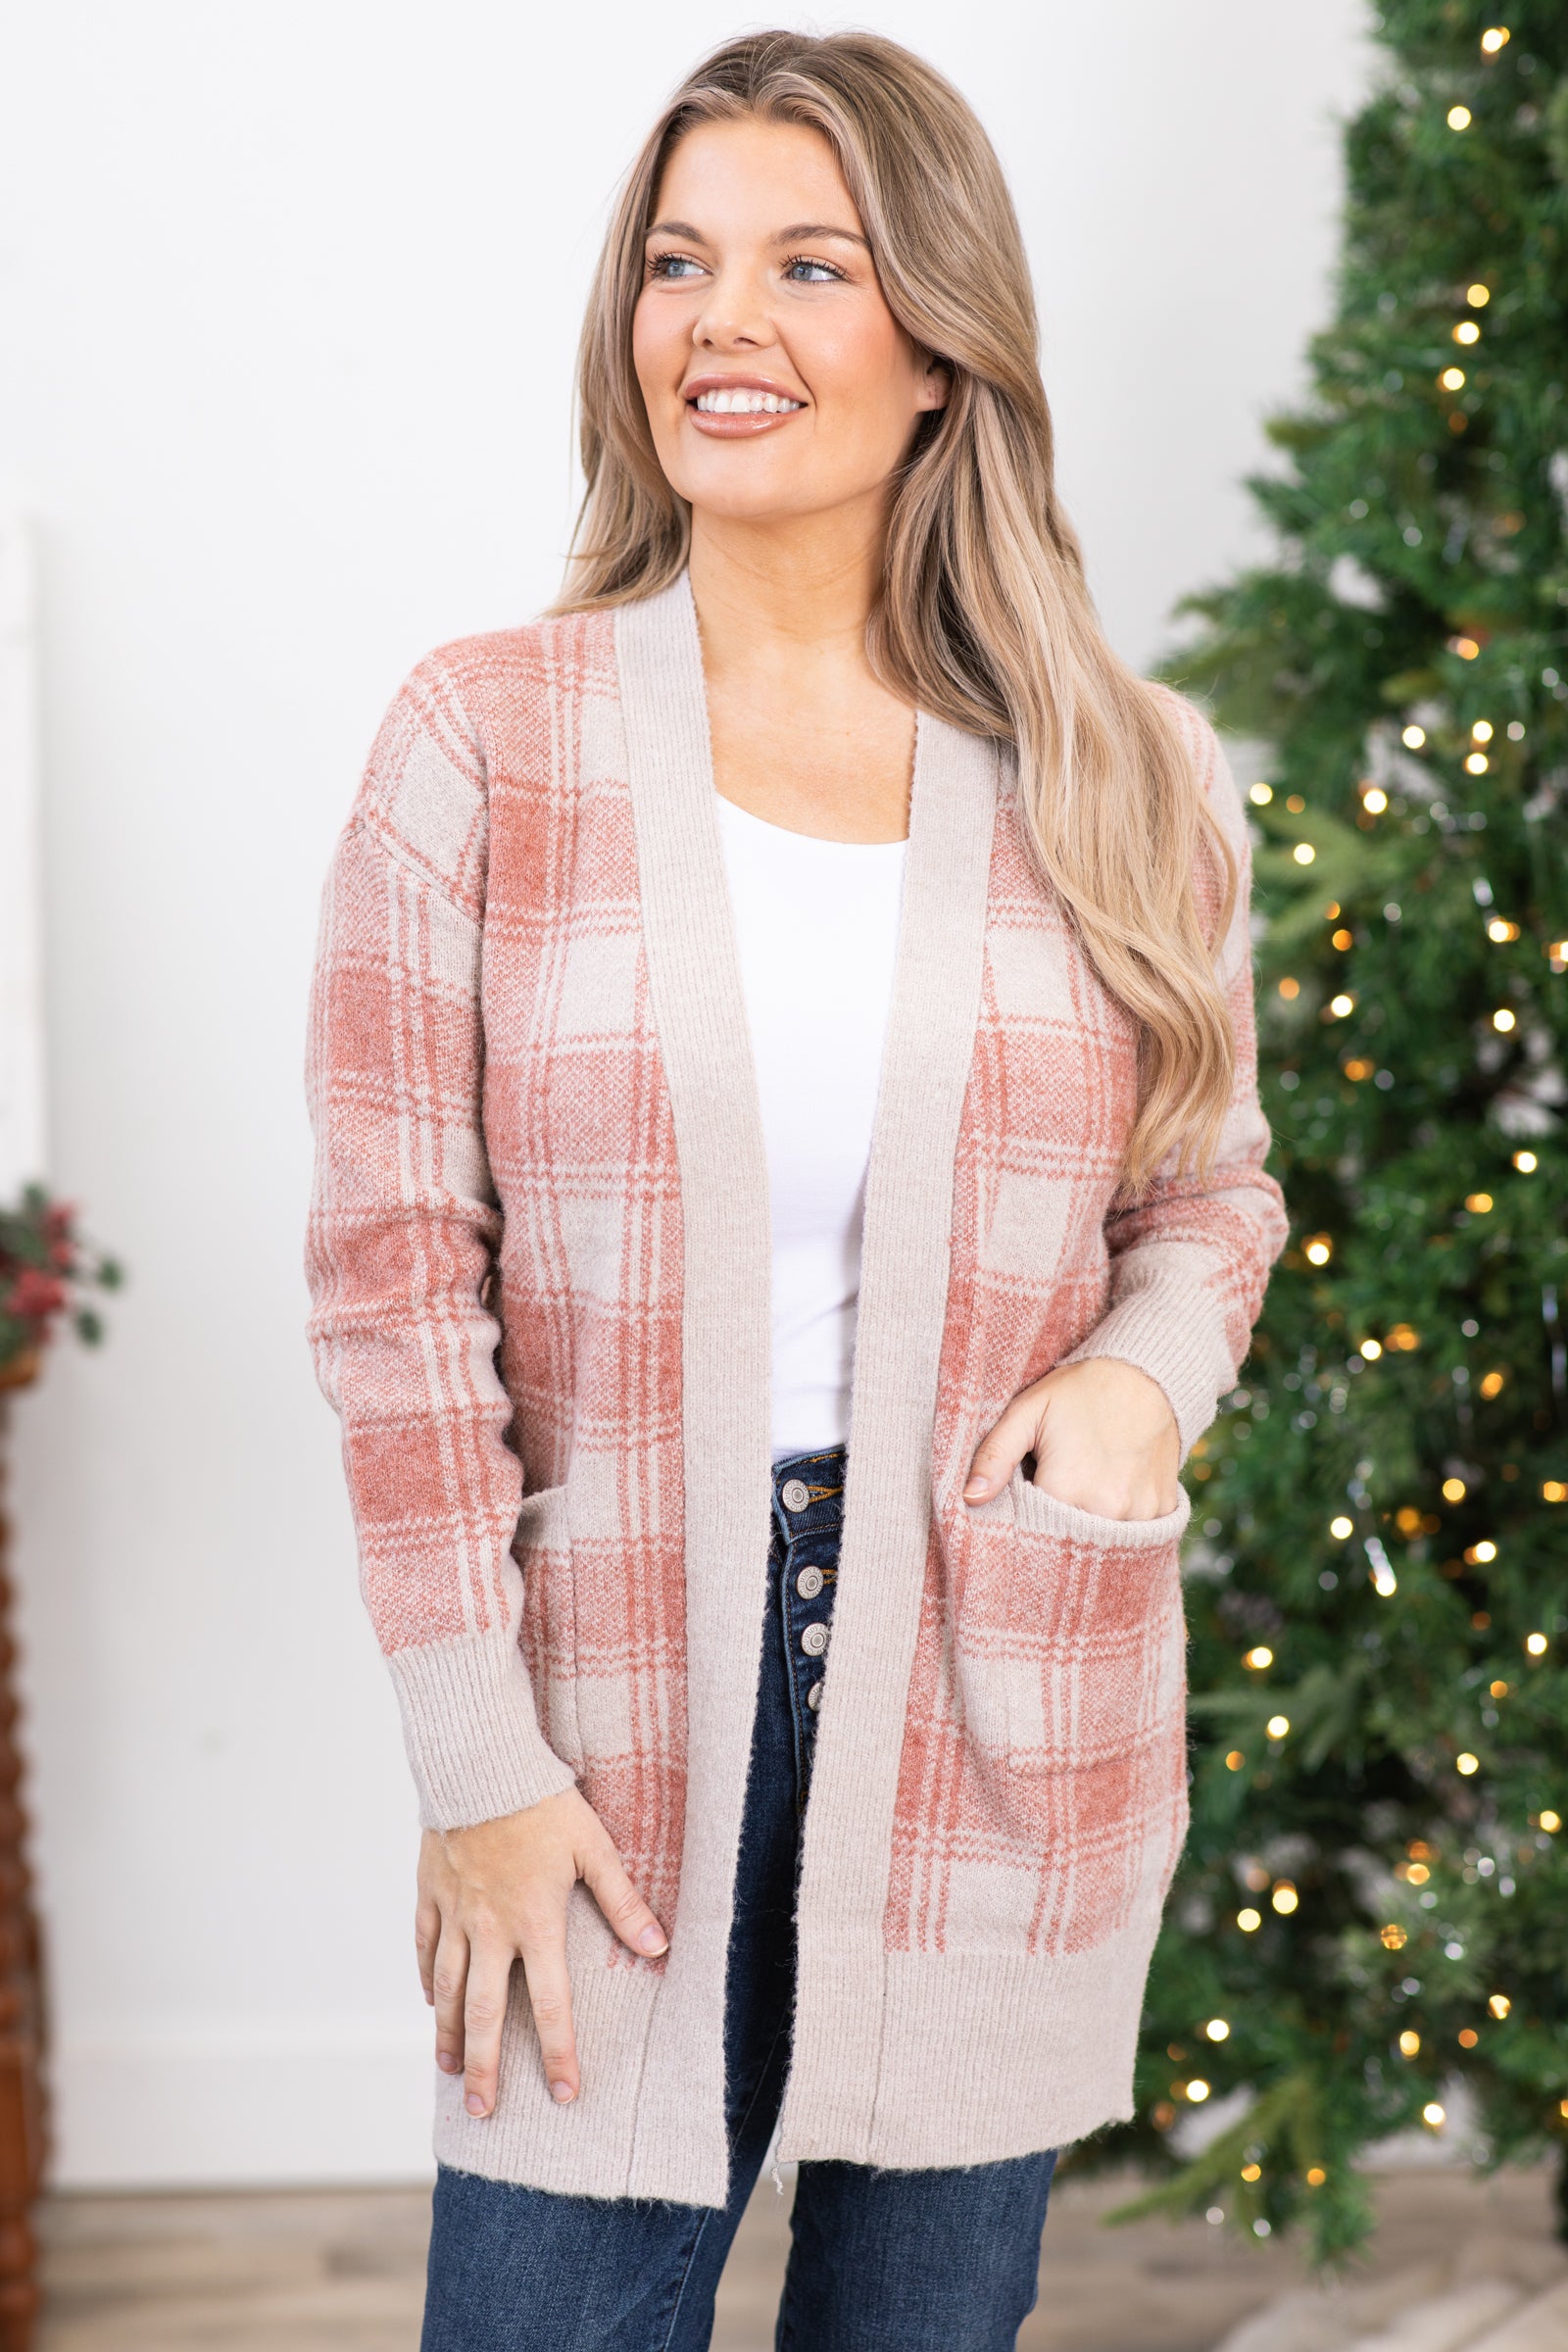 Dusty Rose and Beige Plaid Cardigan